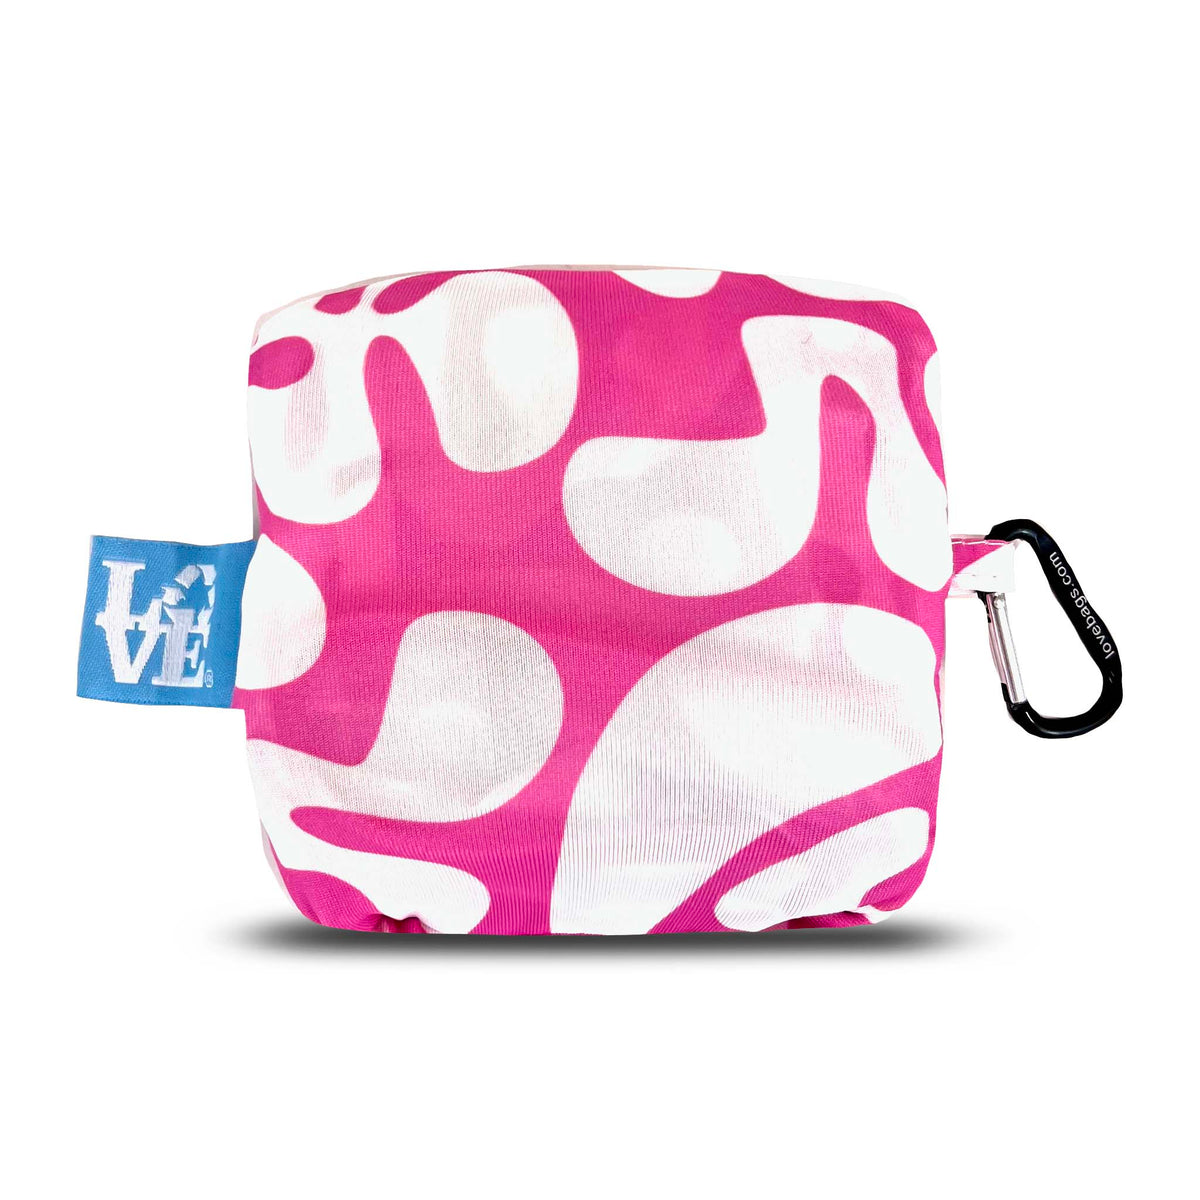 Crossbody Stash It Tote Bag -  Groovy LOVE Pink (with extra long strap)